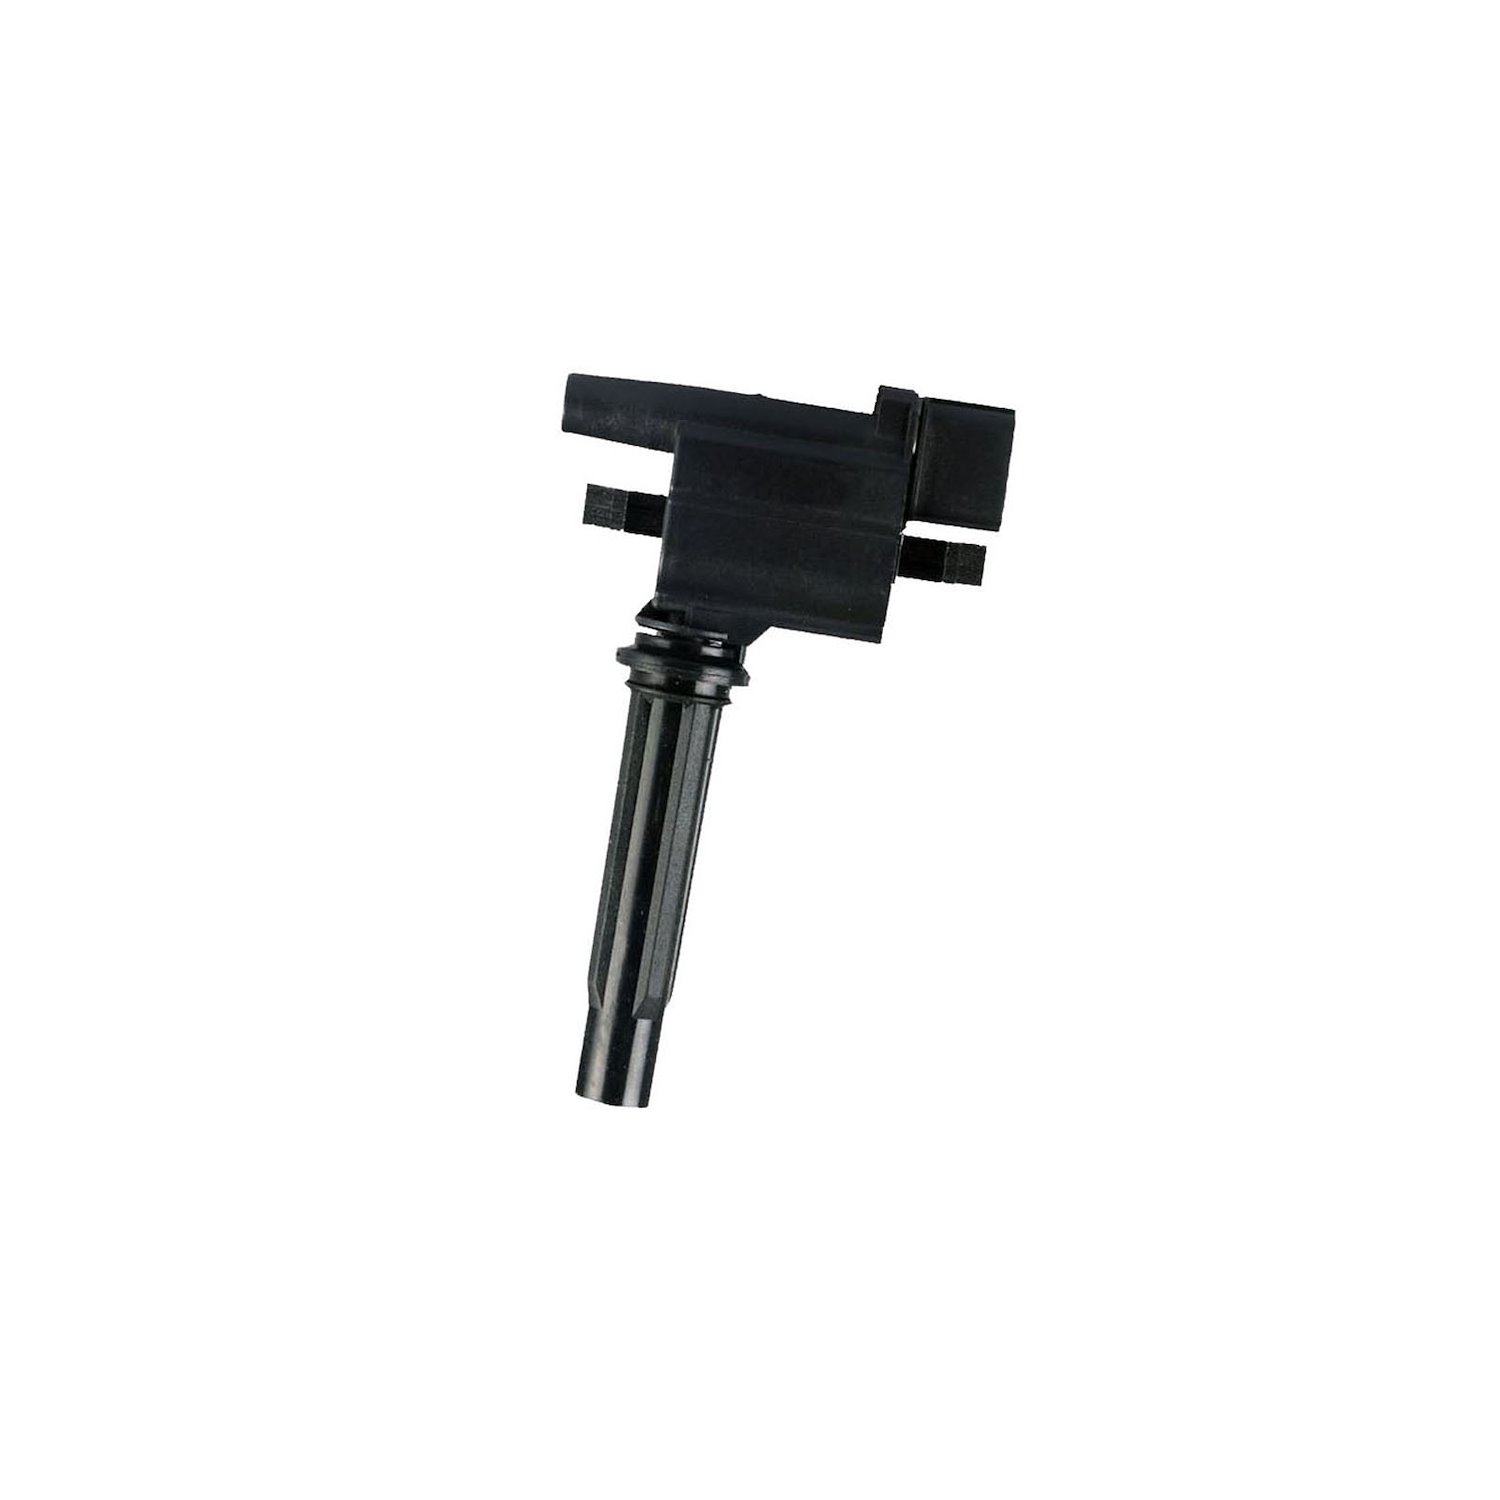 OE Replacement Ignition Coil for 1999-2003 Mazda Protege